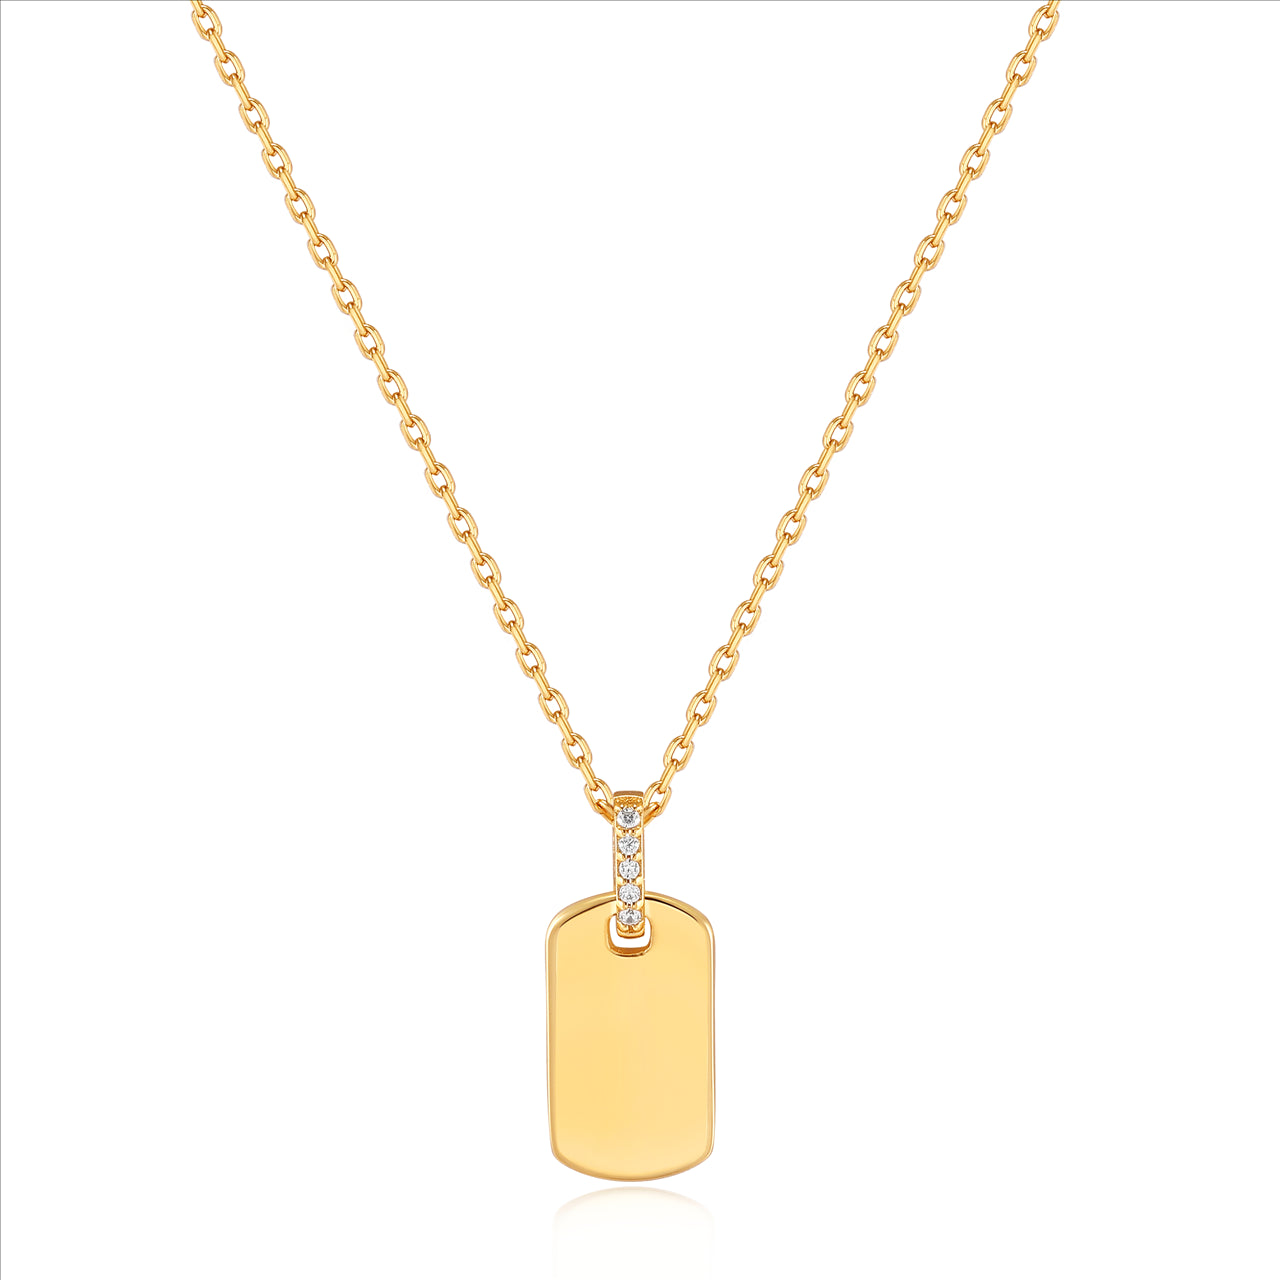 Ania Haie Glam Gold Plated Cz Tag Pendant Necklace 45+5cm